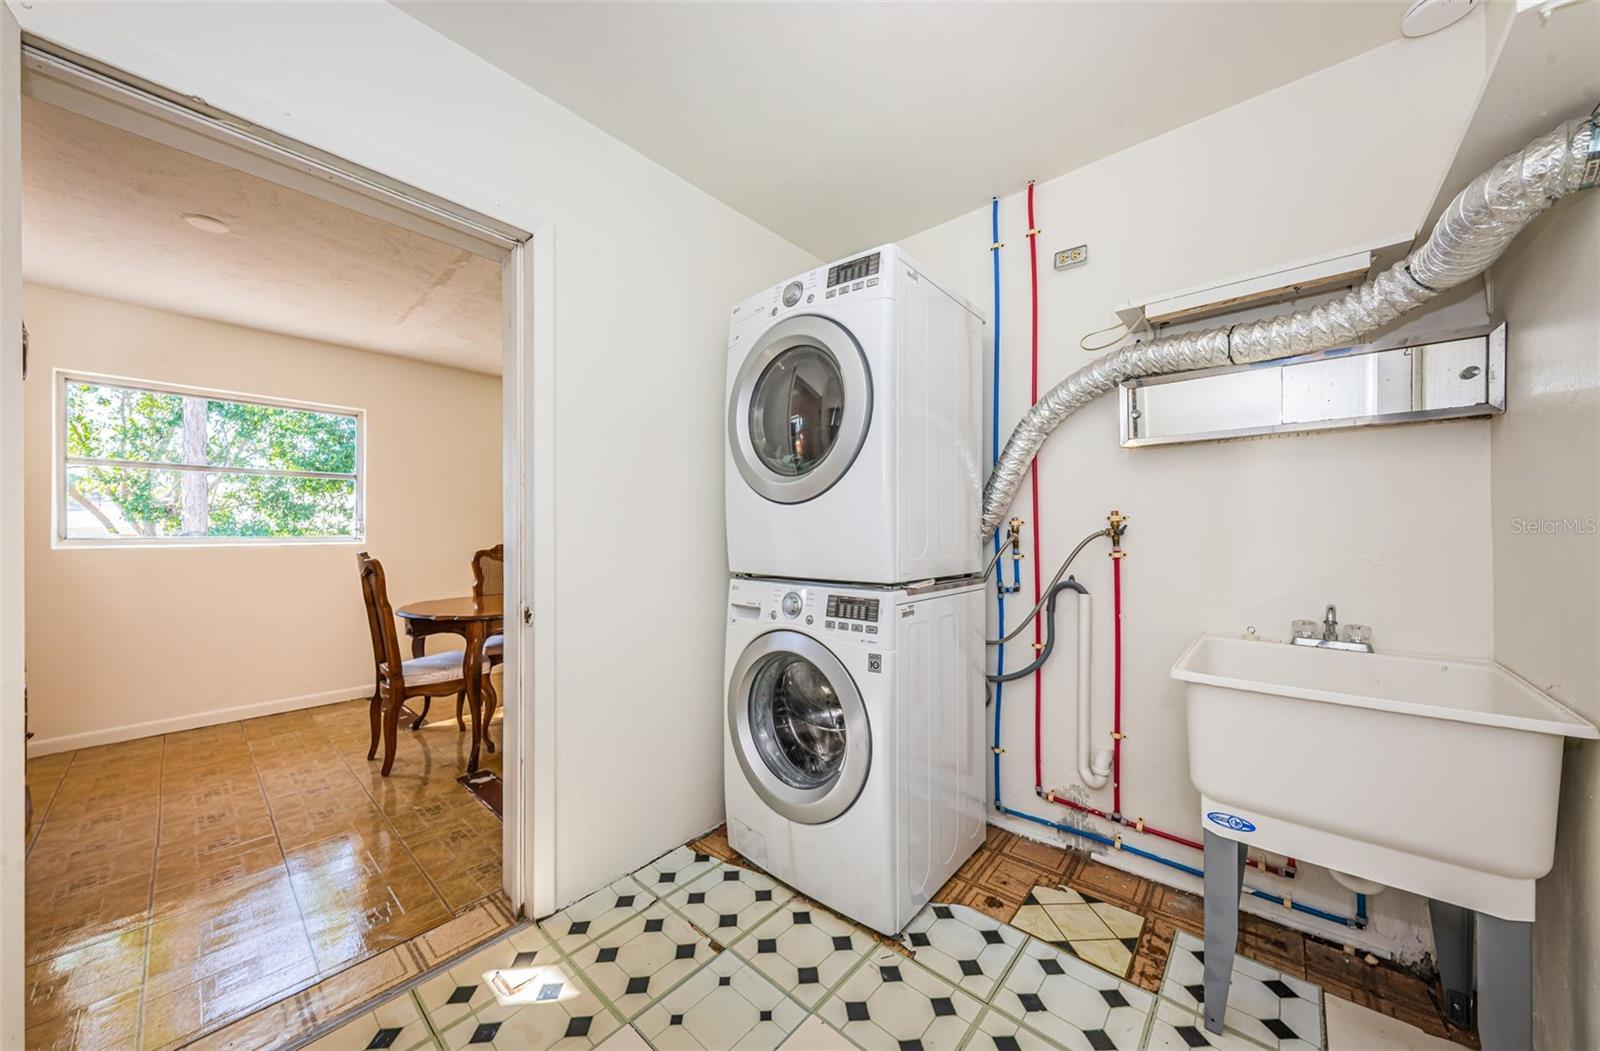 Large laundry room with utility sink.